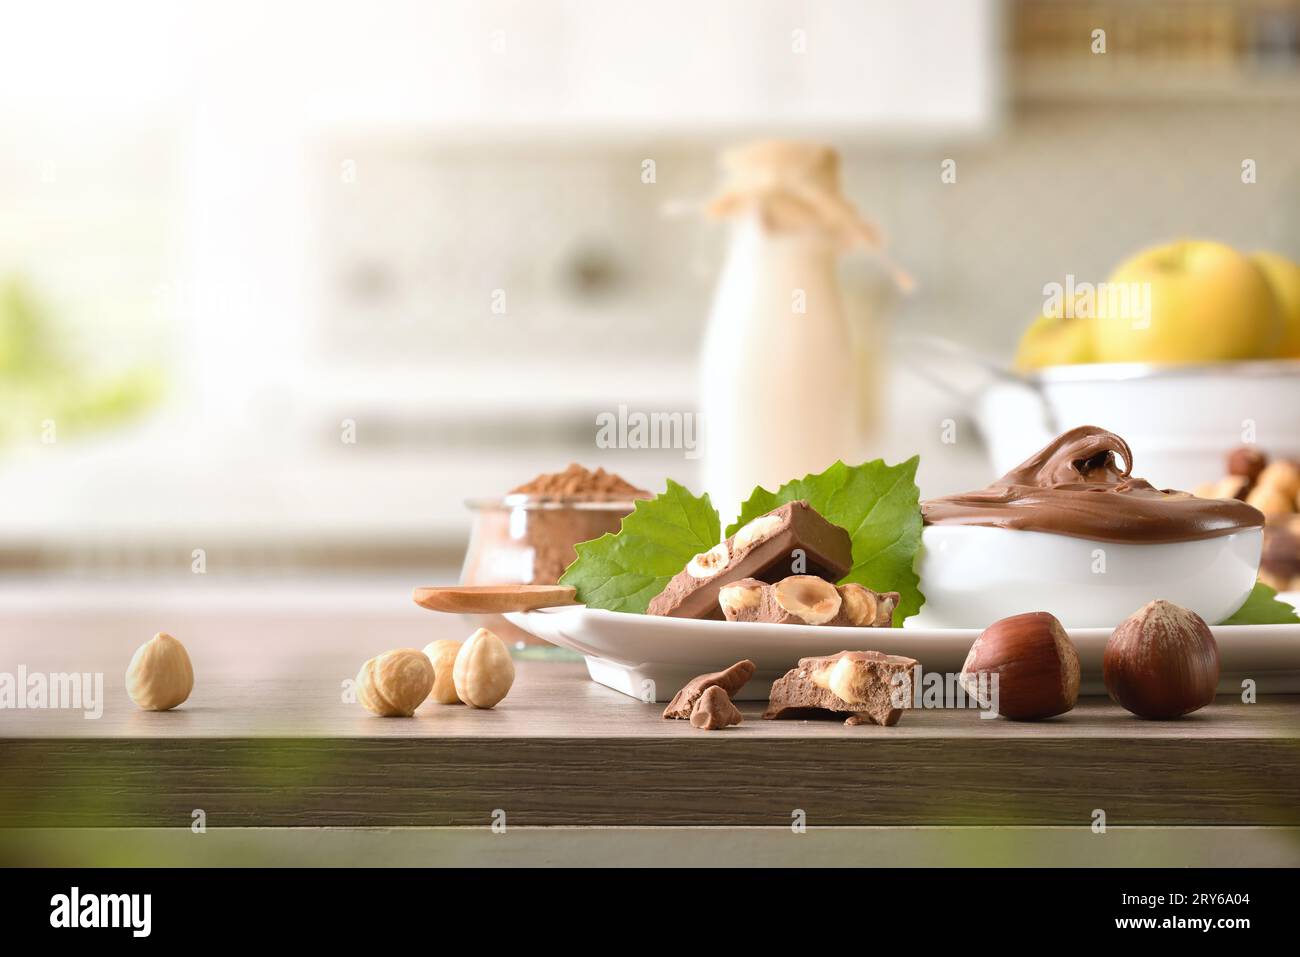 Slices and cream of milk chocolate with hazelnuts on wooden table with leaves and nuts around in a kitchen. Front view. Stock Photo